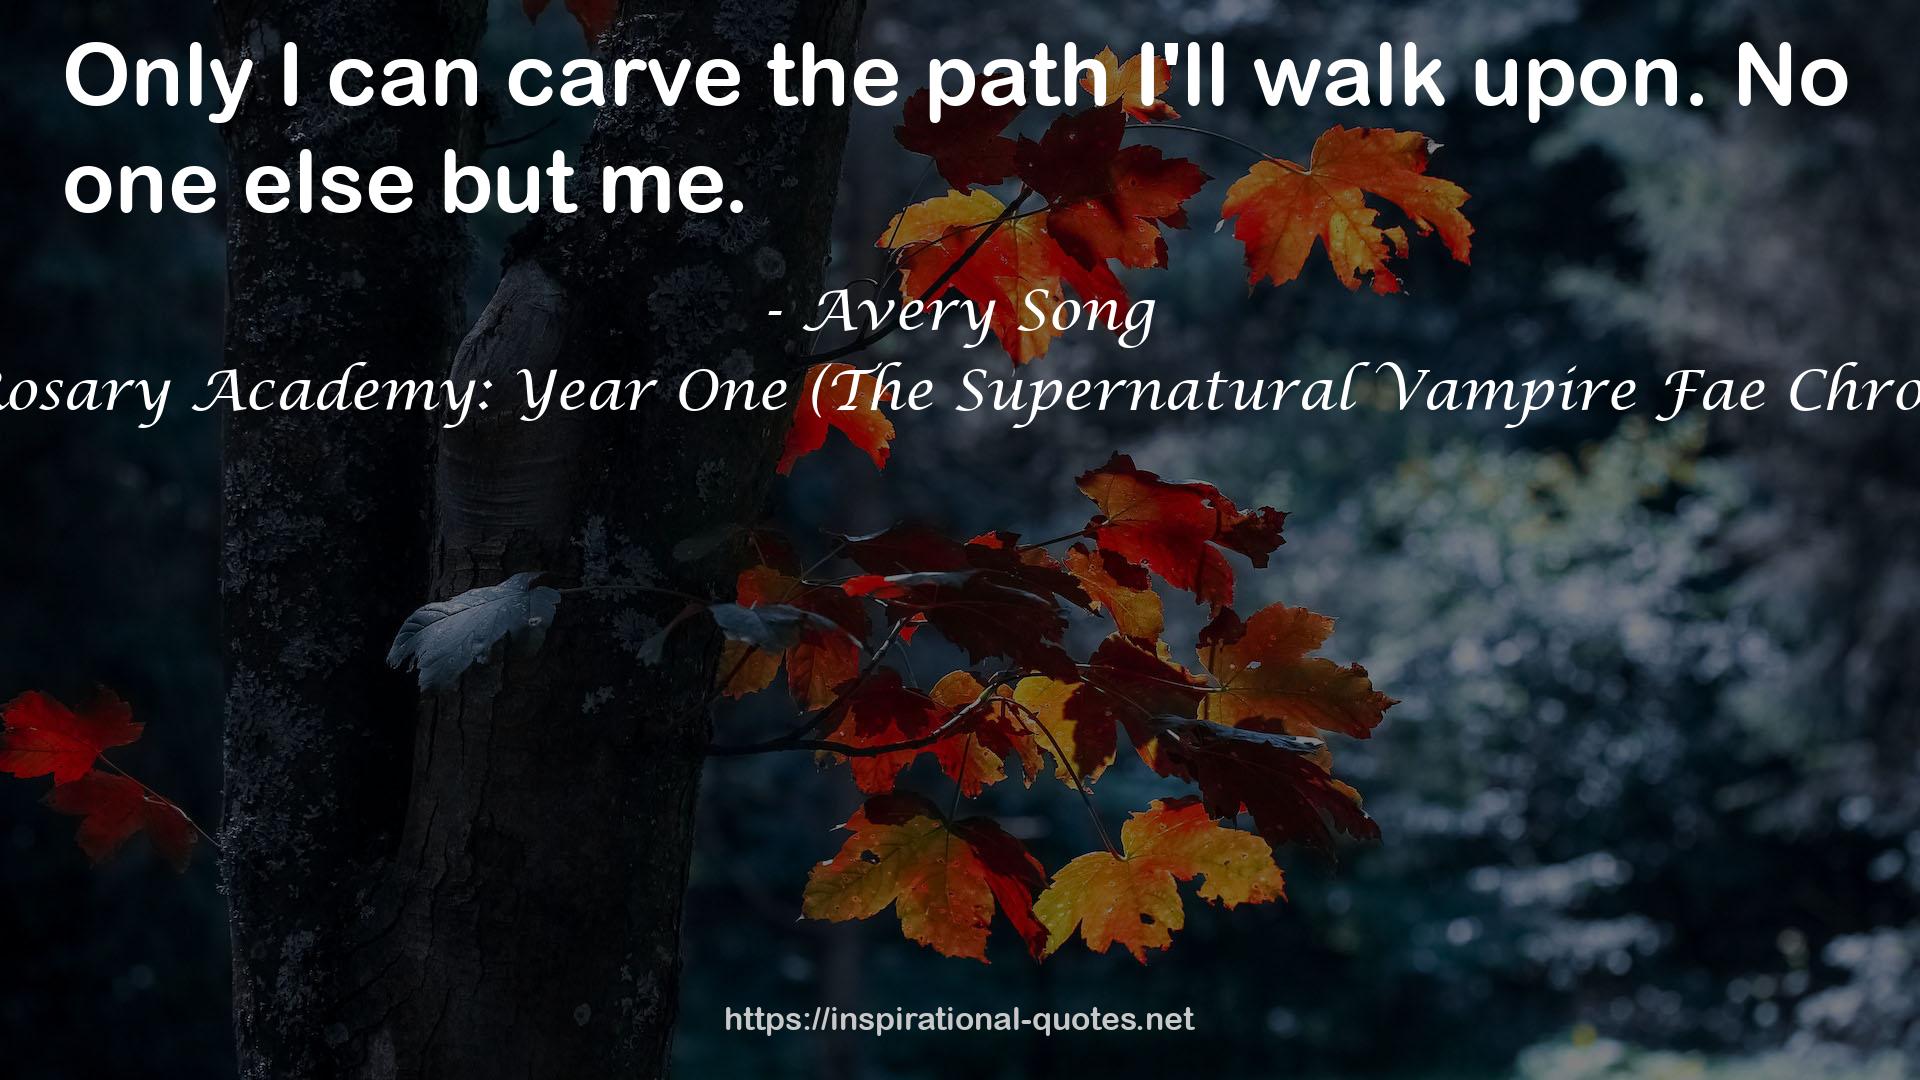 Bloody Rosary Academy: Year One (The Supernatural Vampire Fae Chronicles #1) QUOTES